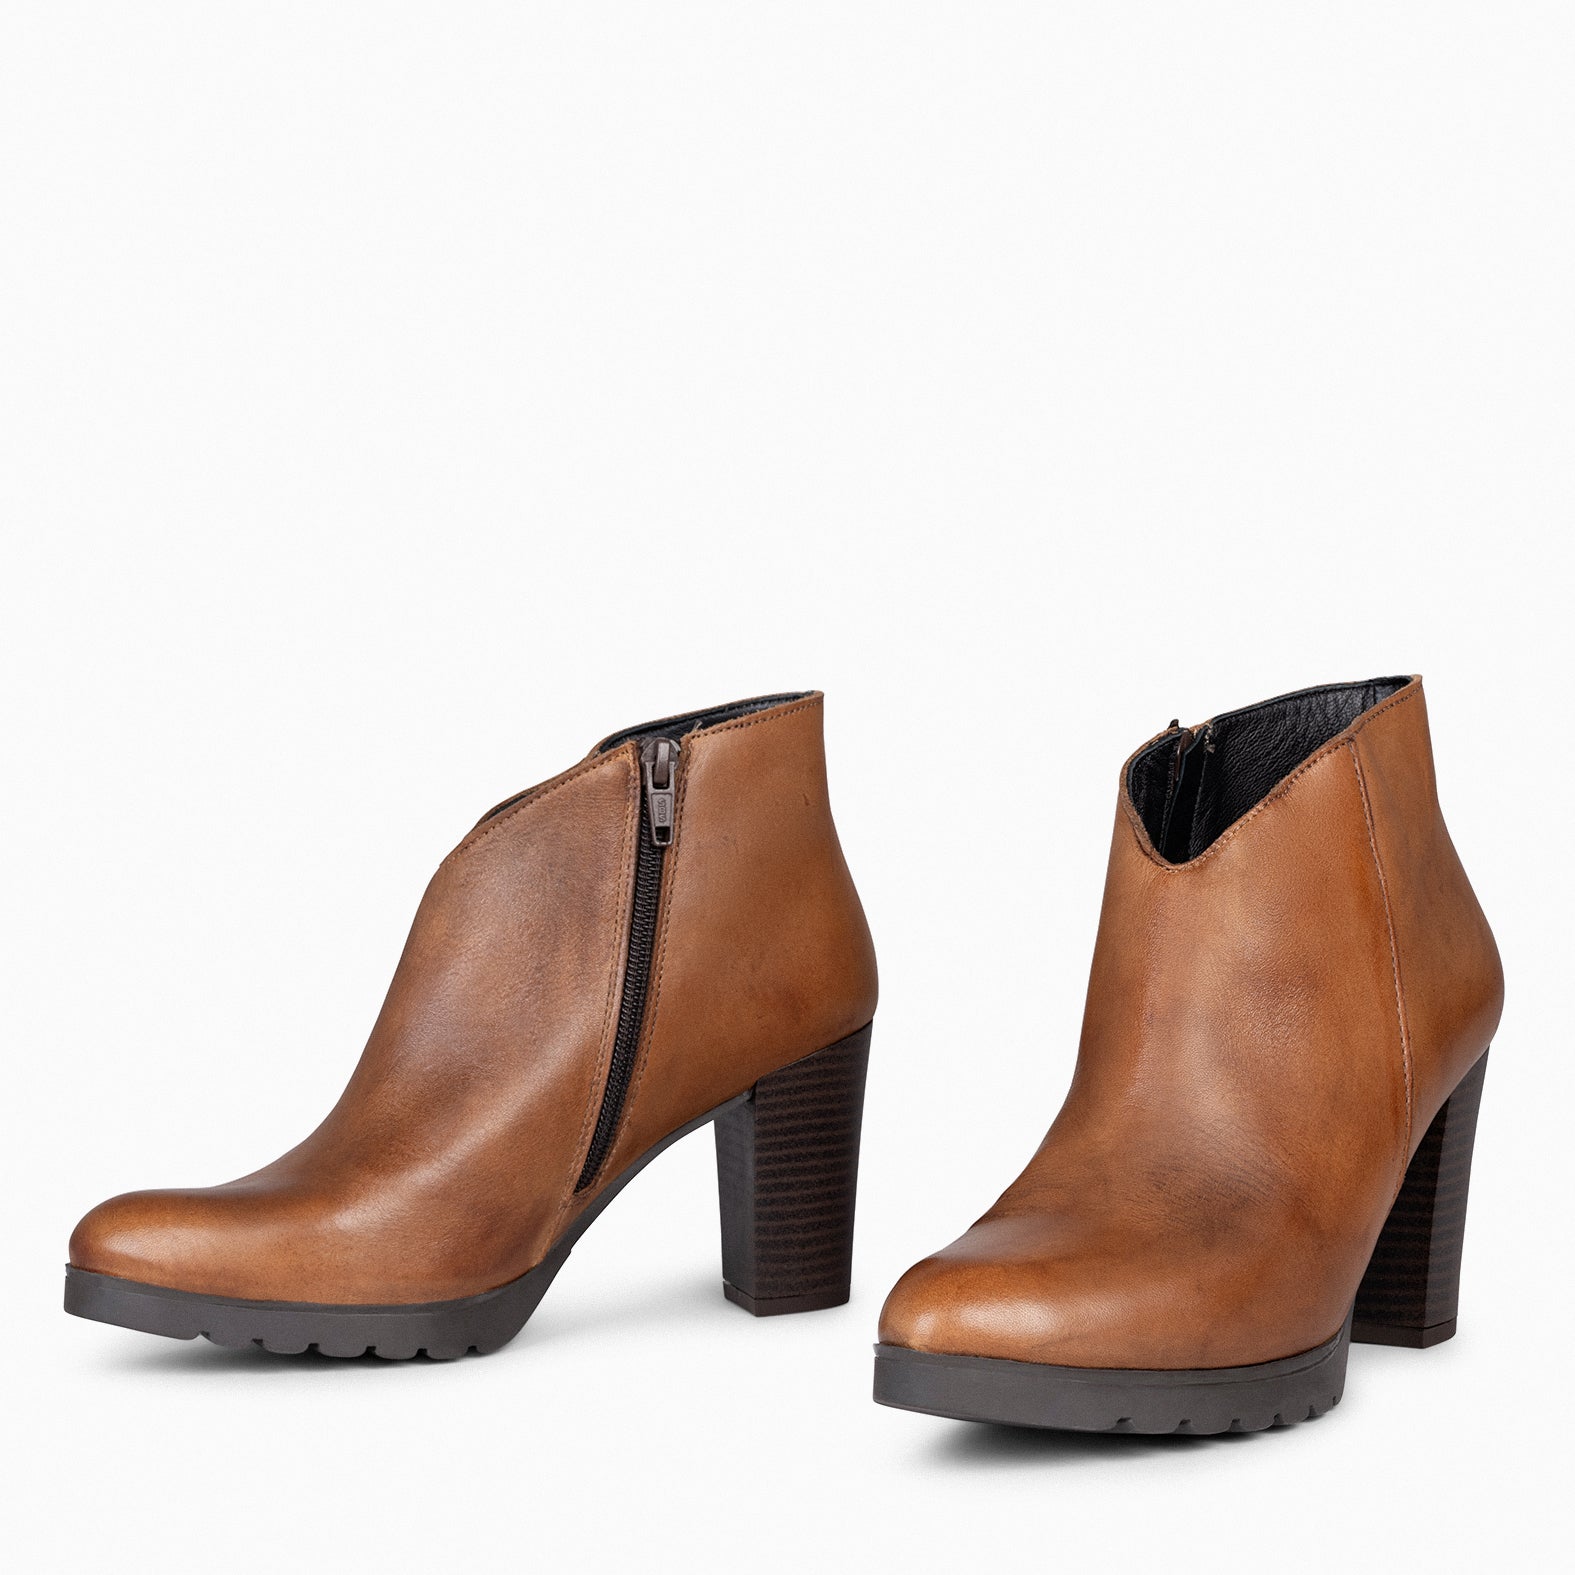 CLASSIC - CAMEL Women's Ankle Boots with heel